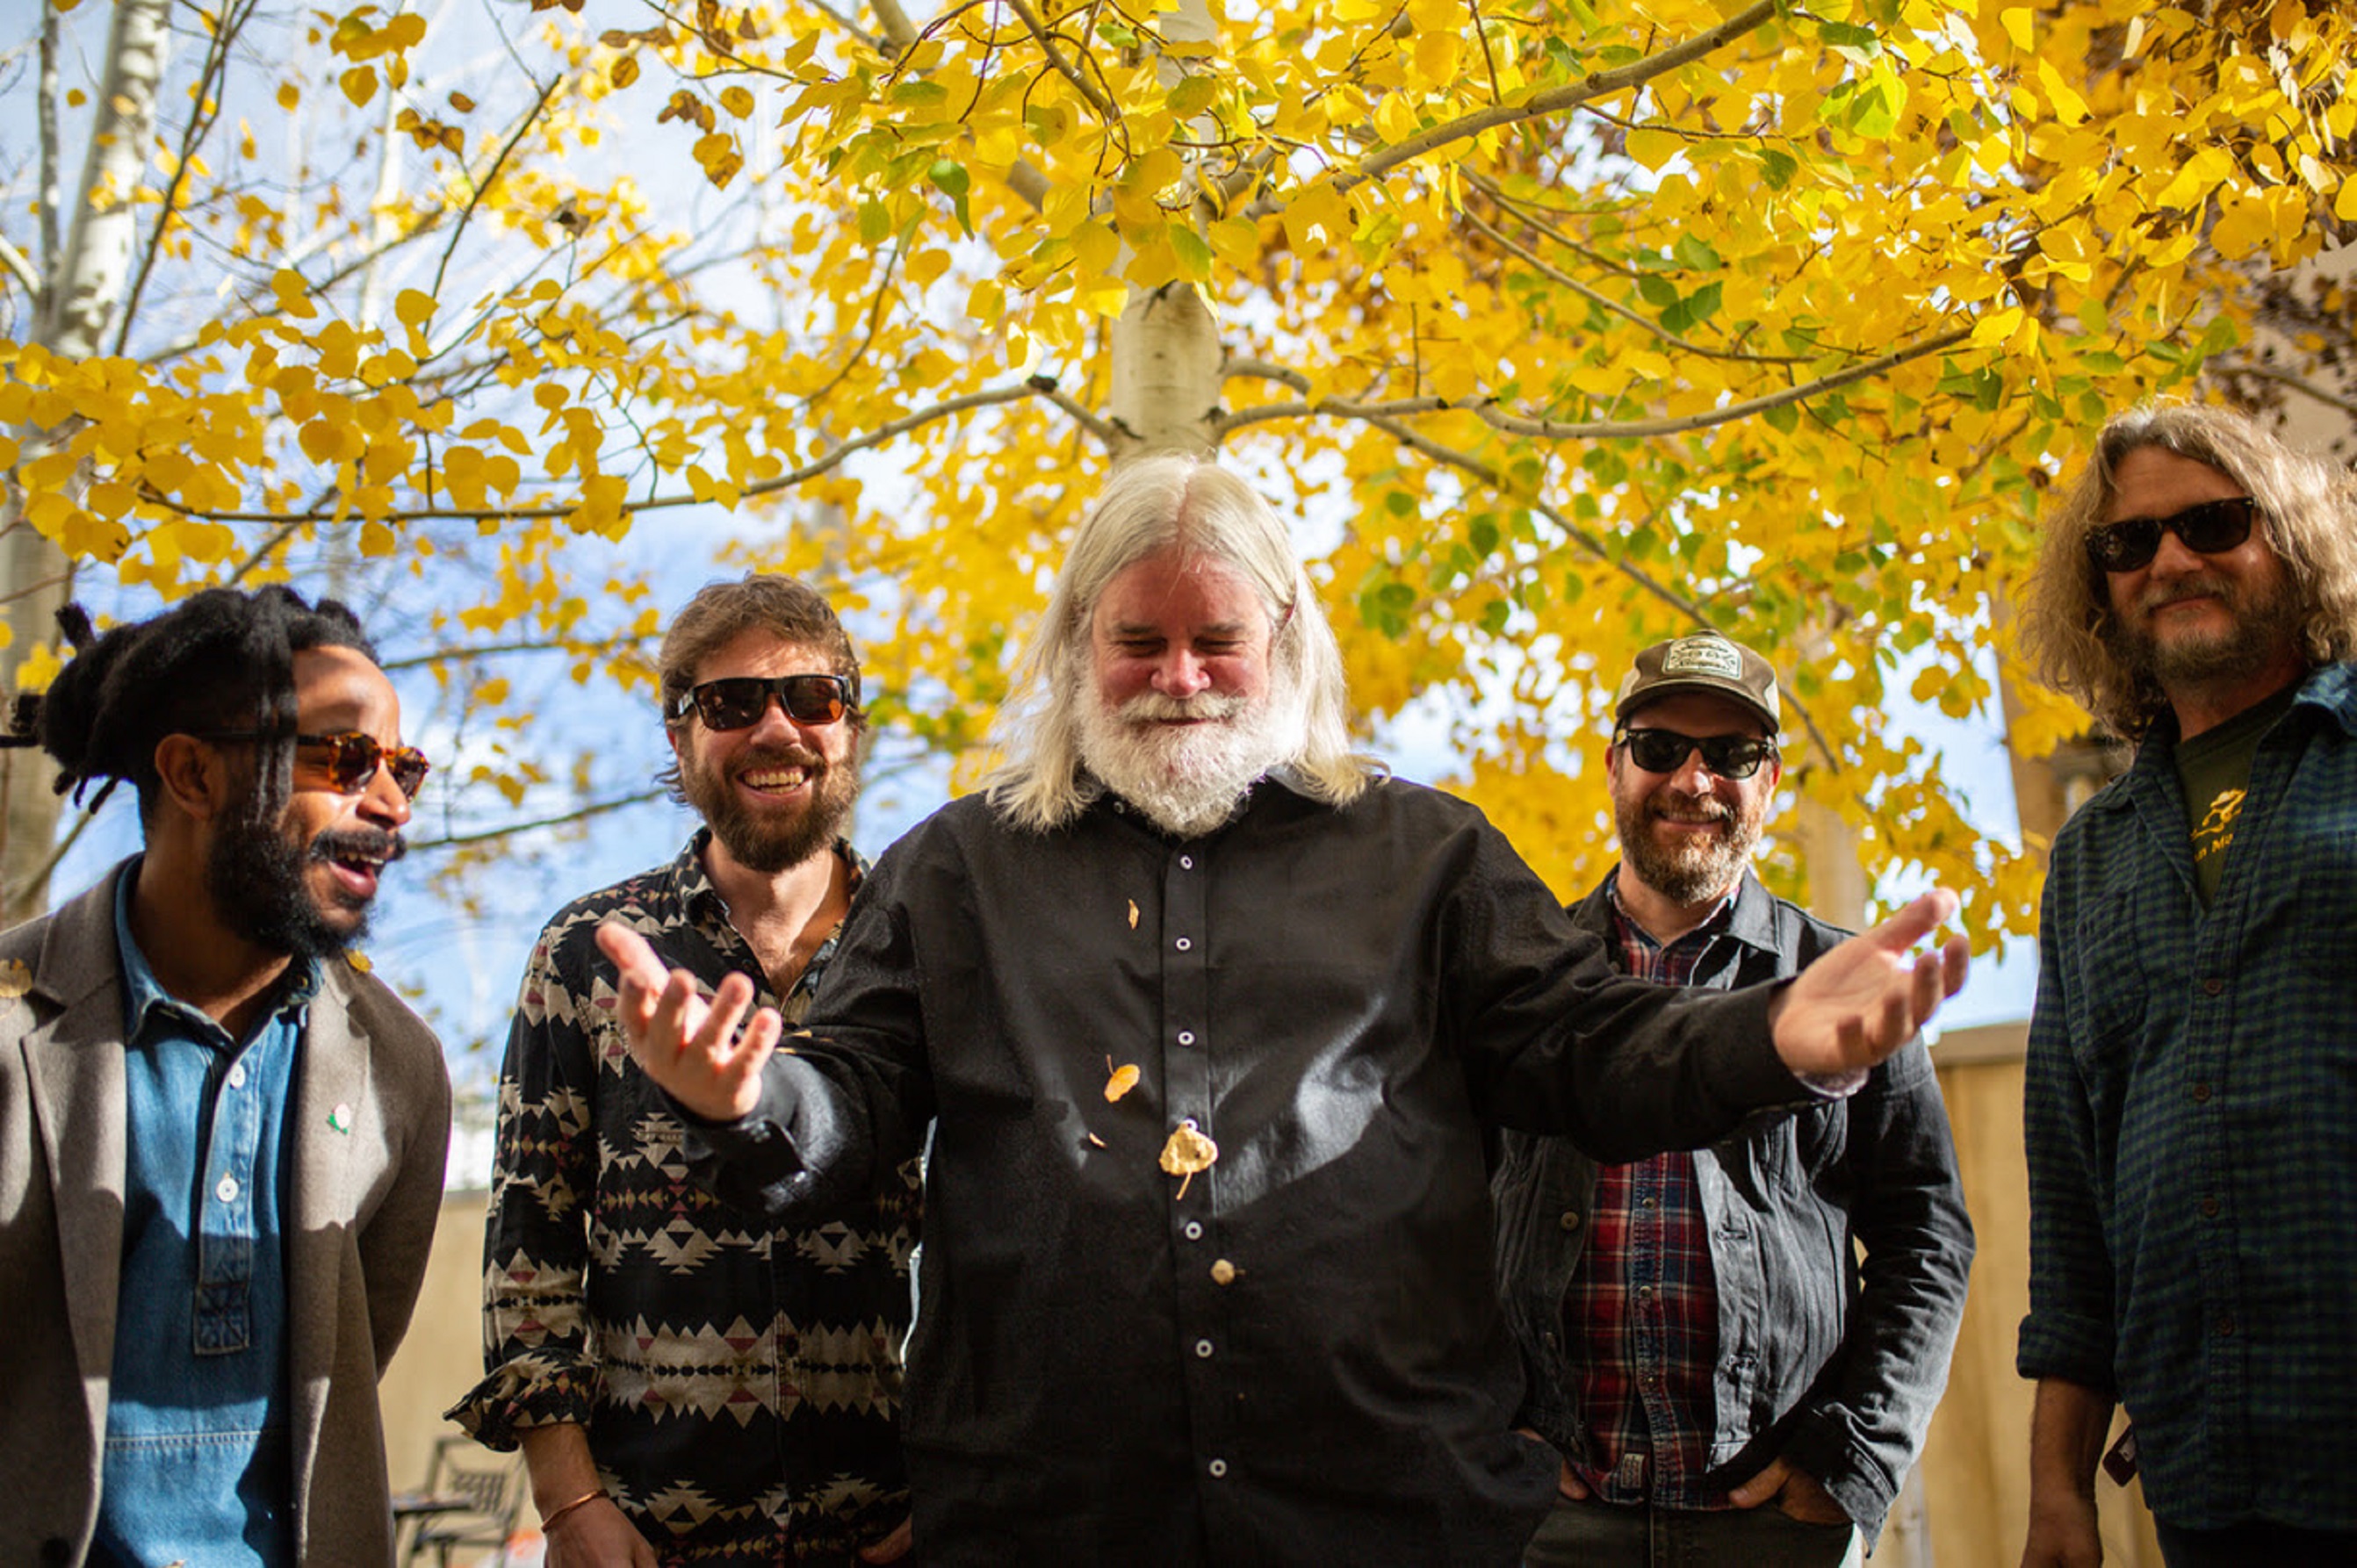 Leftover Salmon returns to Compass Records